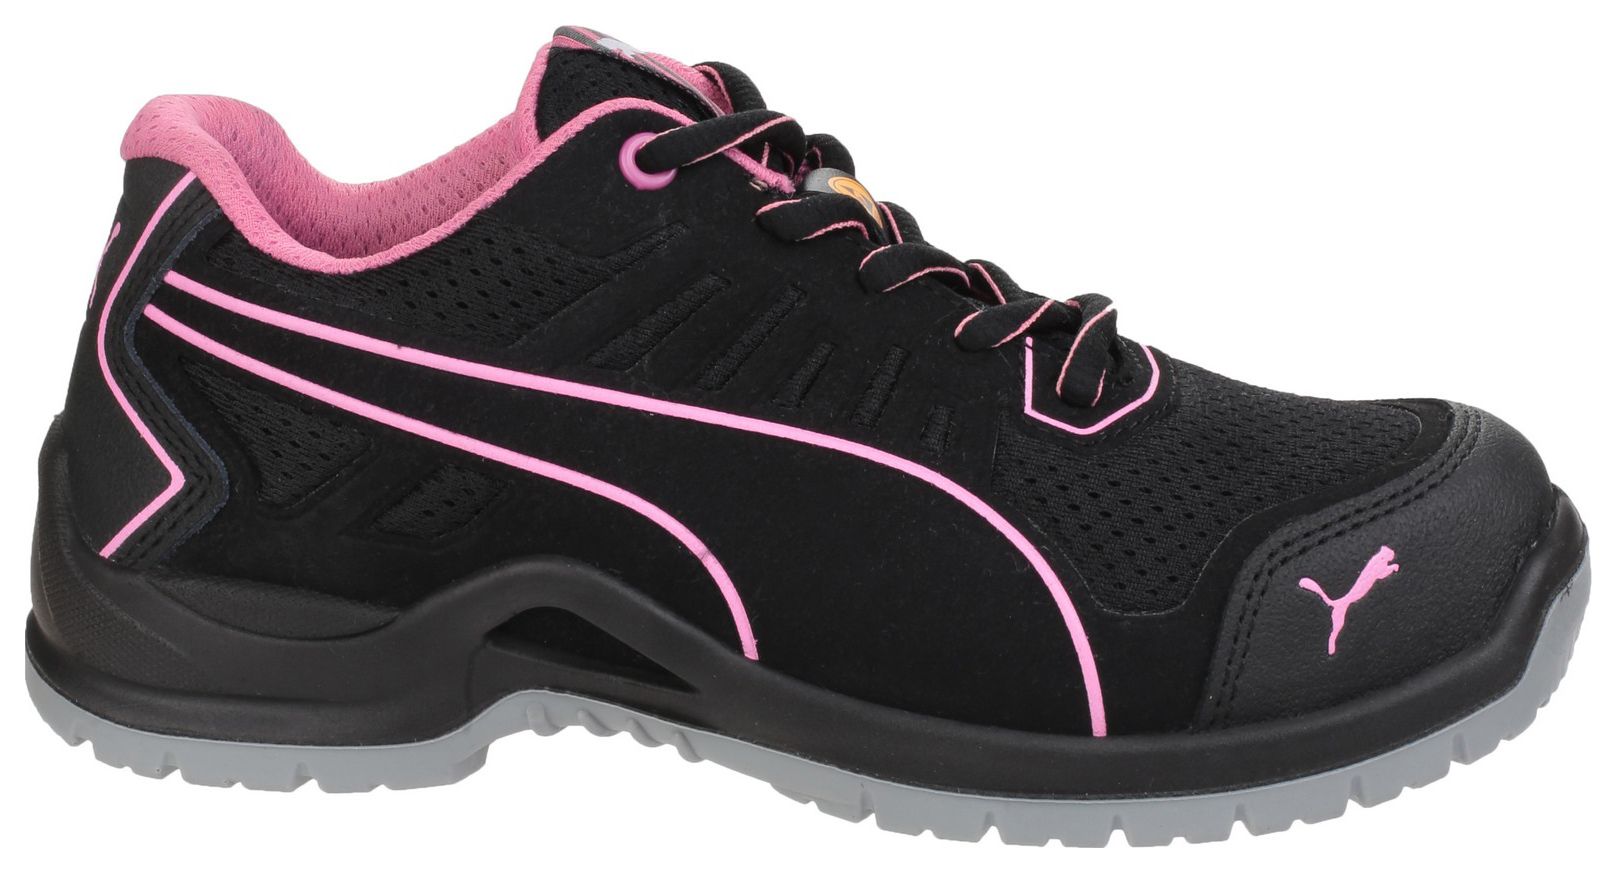 Puma Fuse Technic 644110 Womens Safety Trainers Black - Size 38